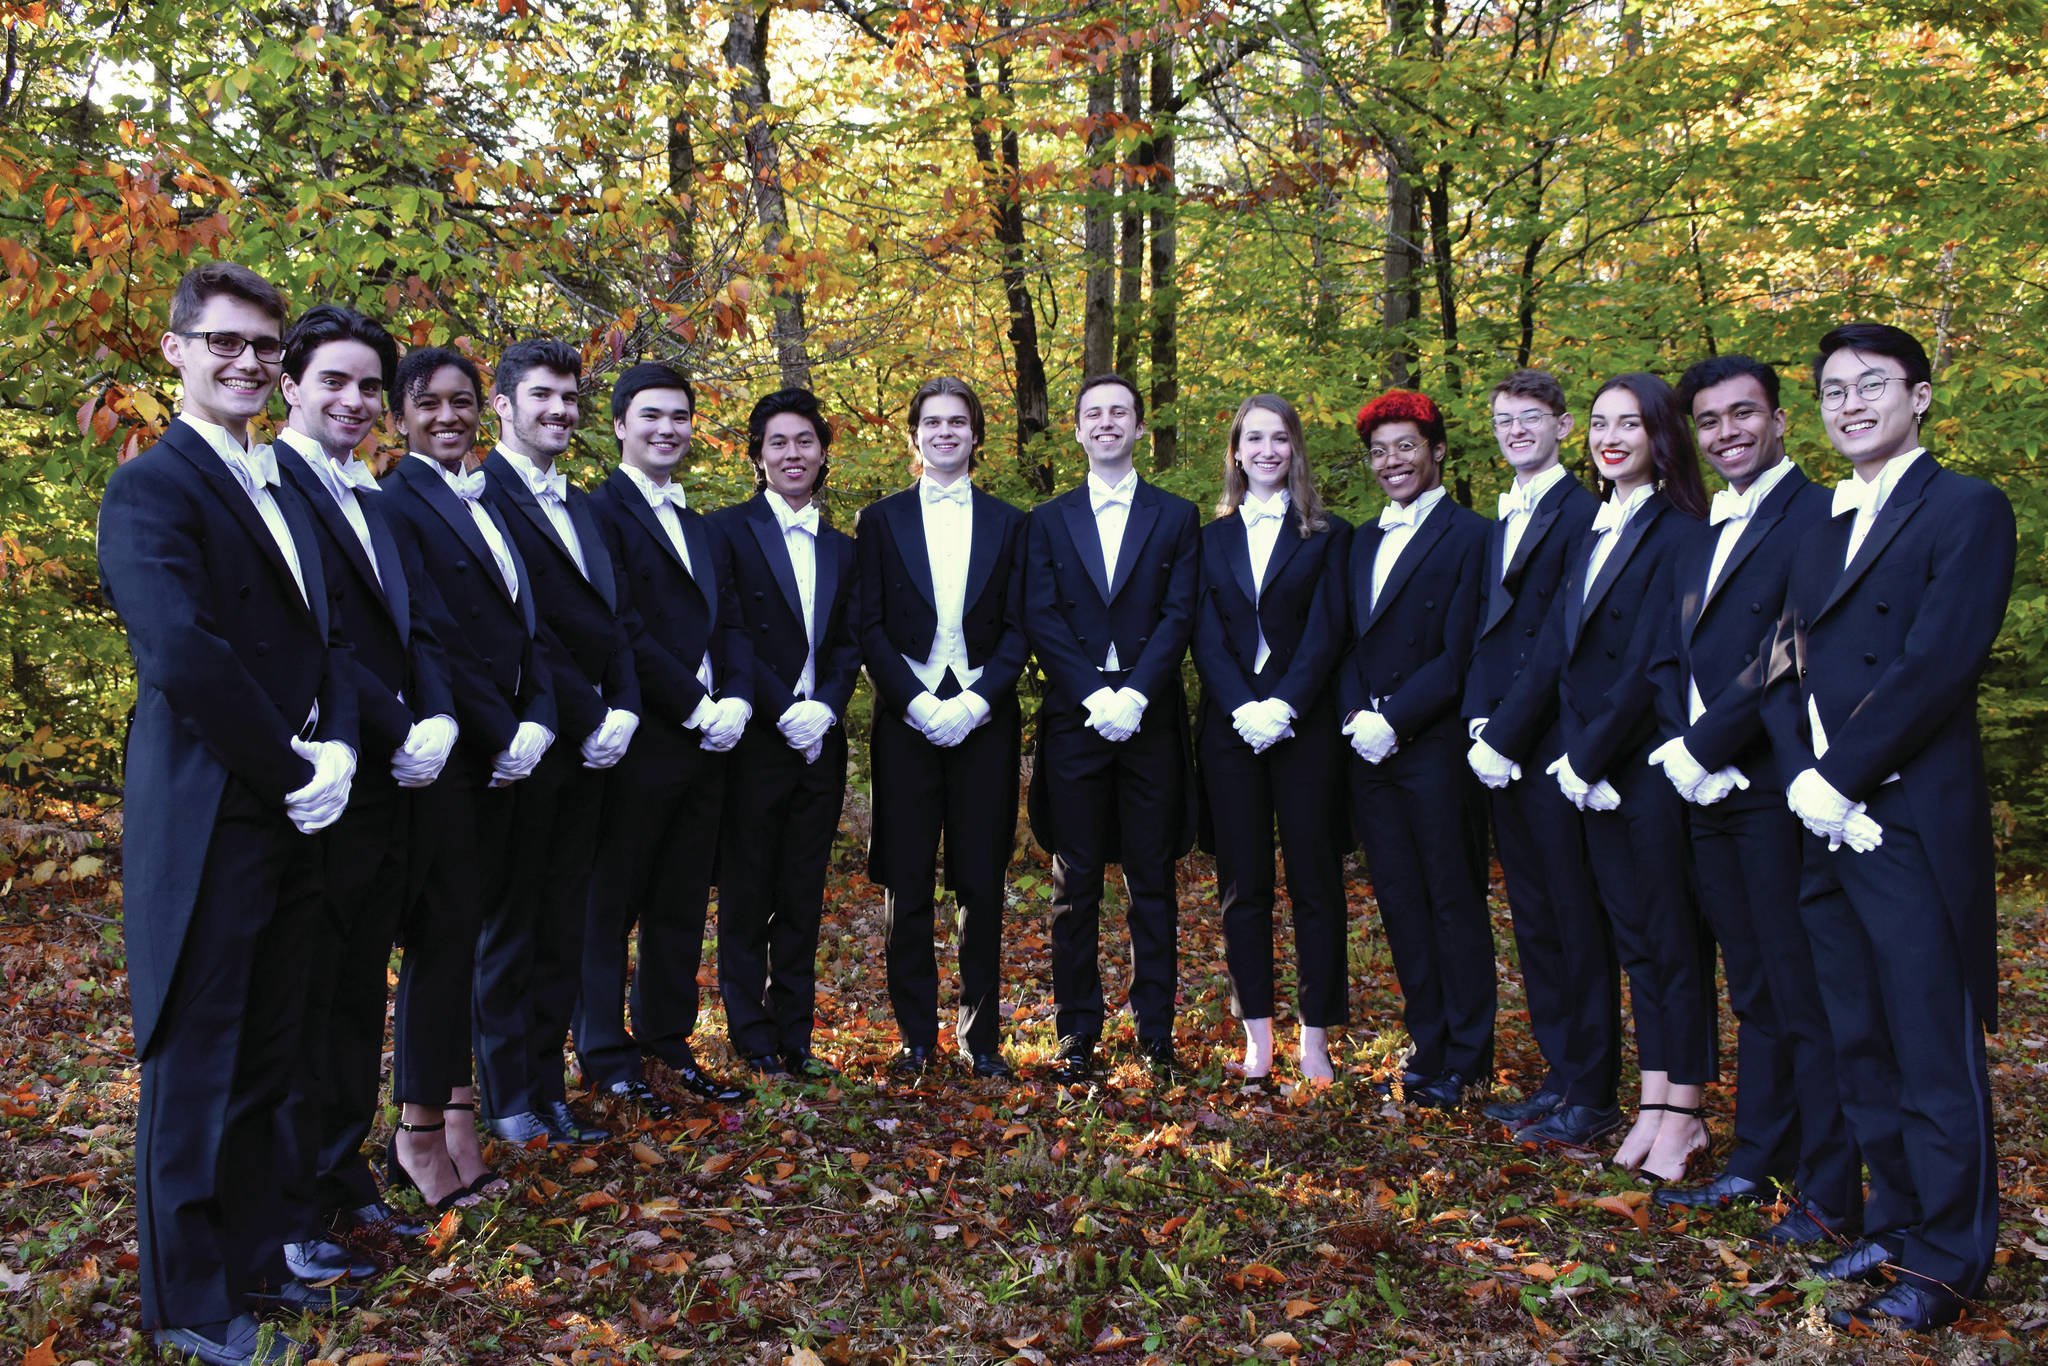 The Yale Whiffenpoofs will perform at 1 p.m. today at the Boathouse Pavilion on the Homer Spit. A workshop will follow at 5 p.m. at the Homer Council on the Arts.